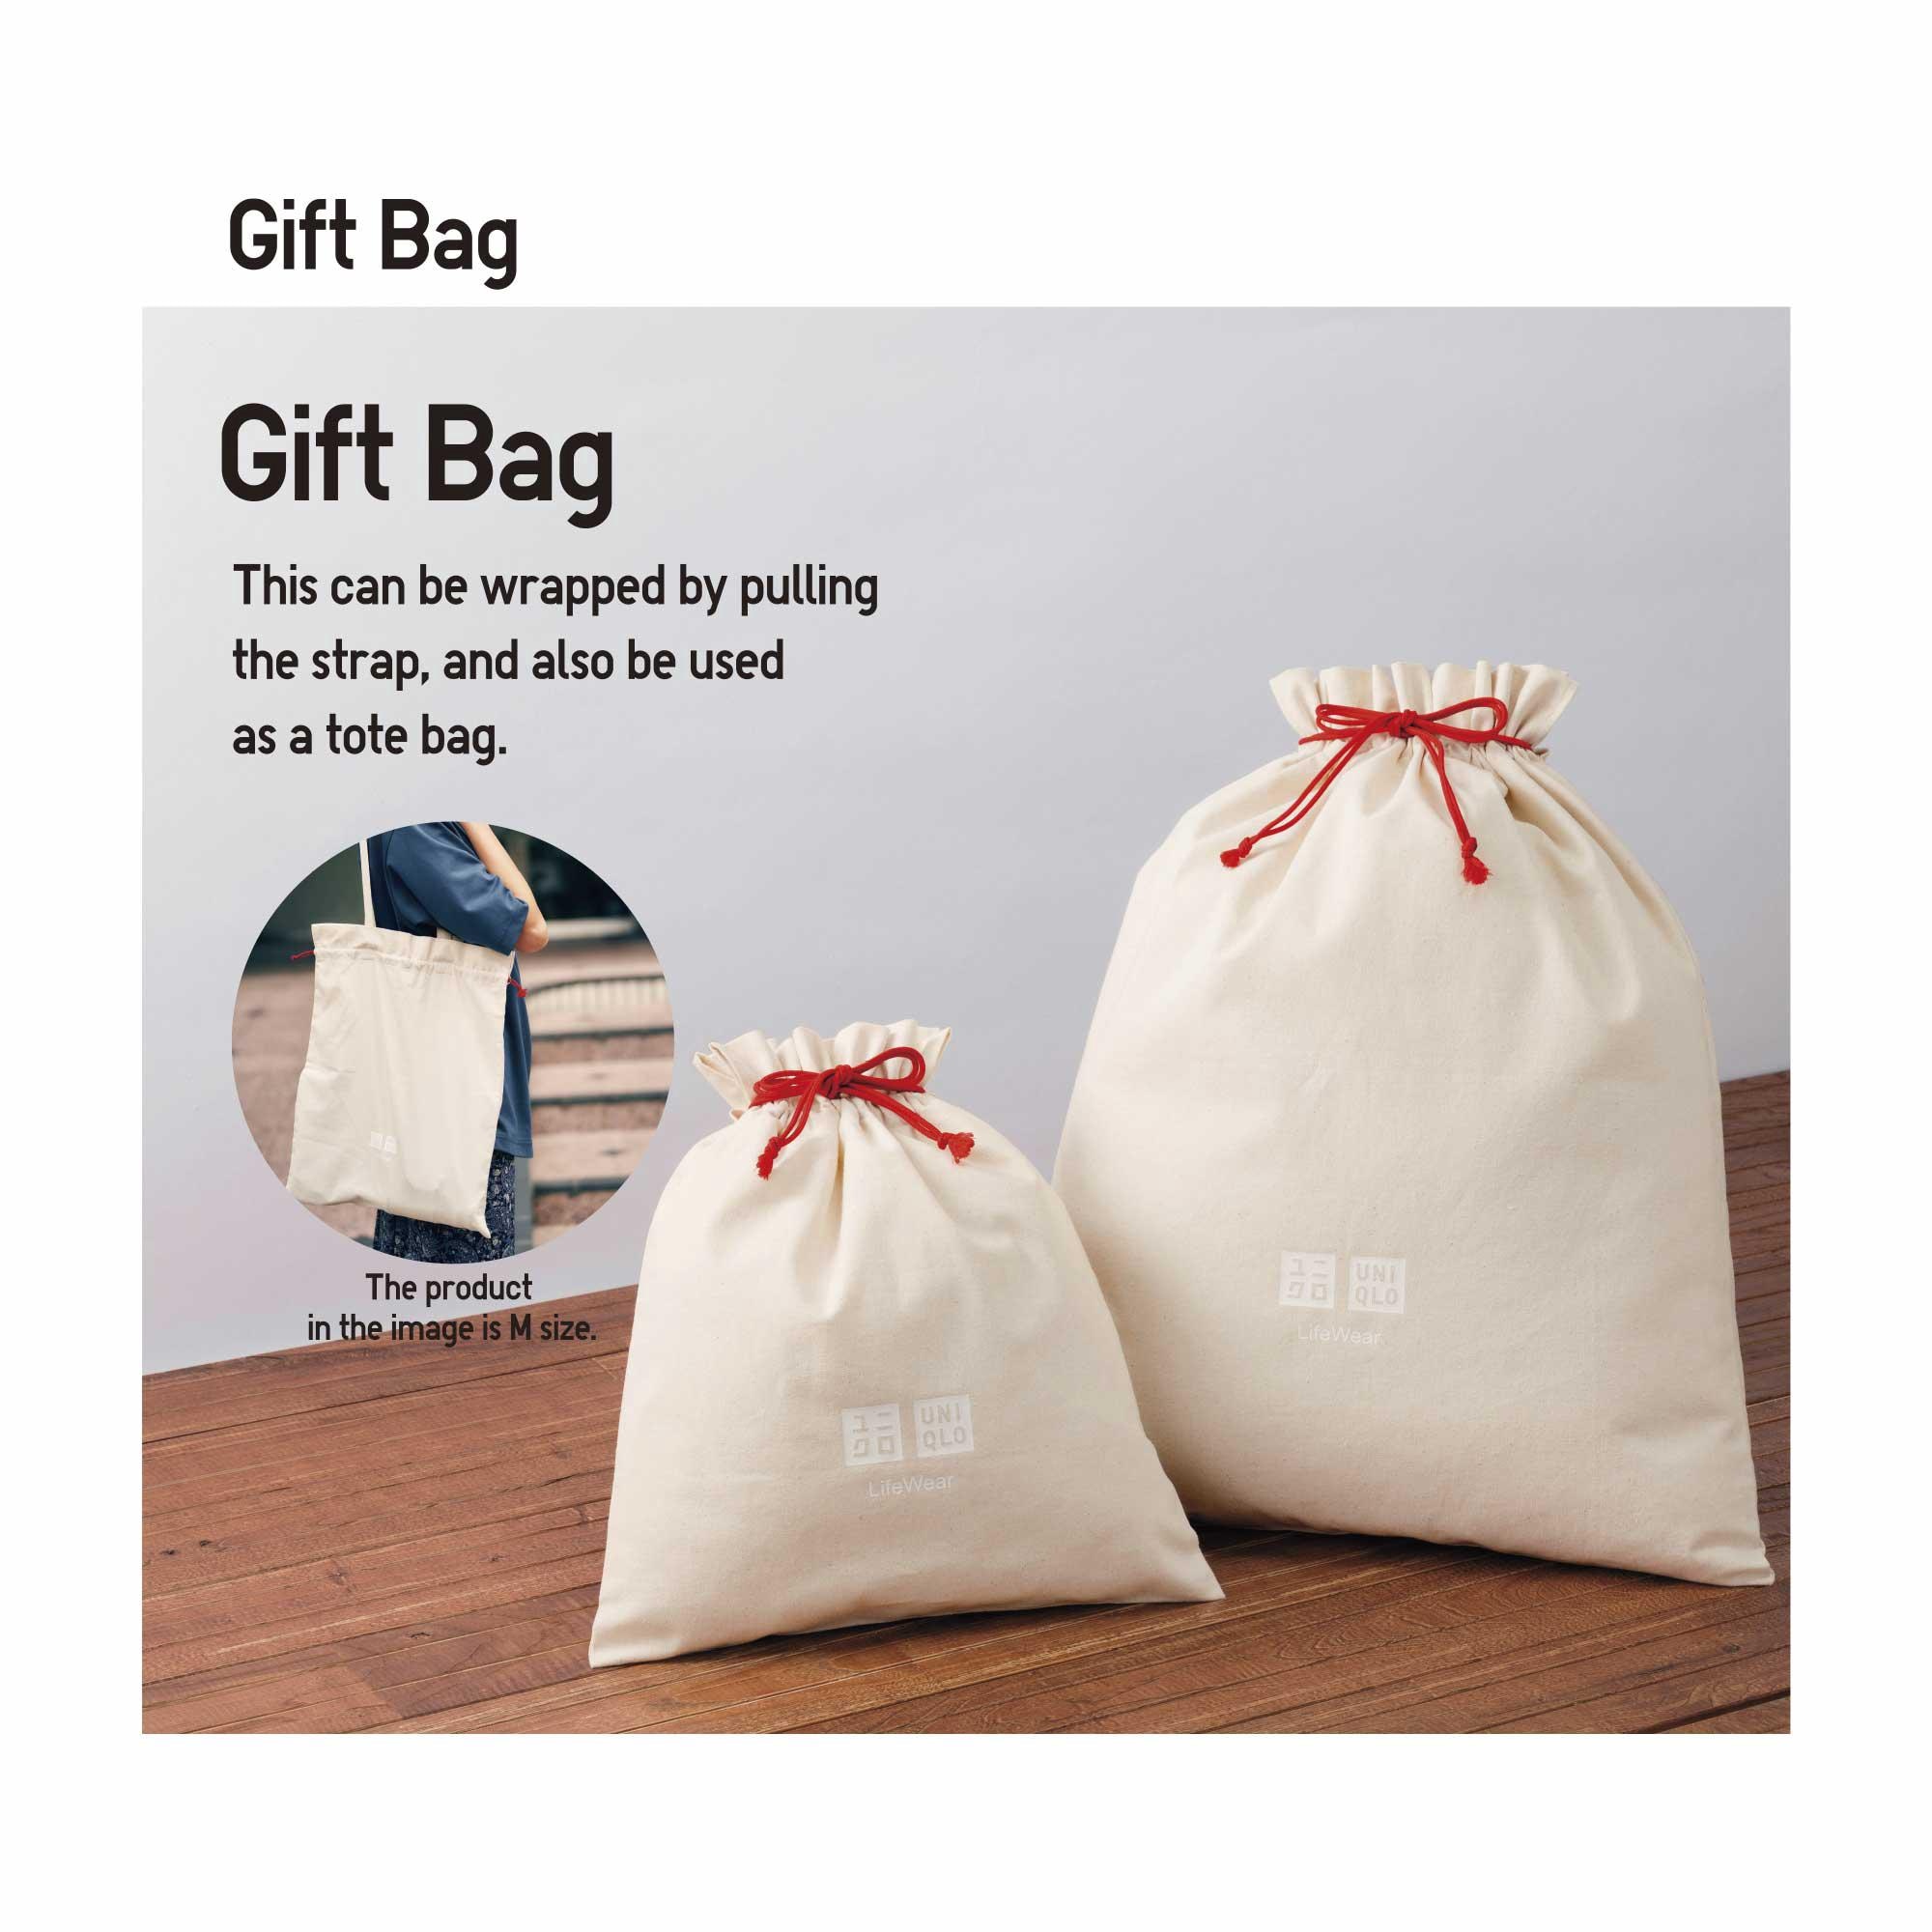 Uniqlo introduces recycled paidfor shopping bags